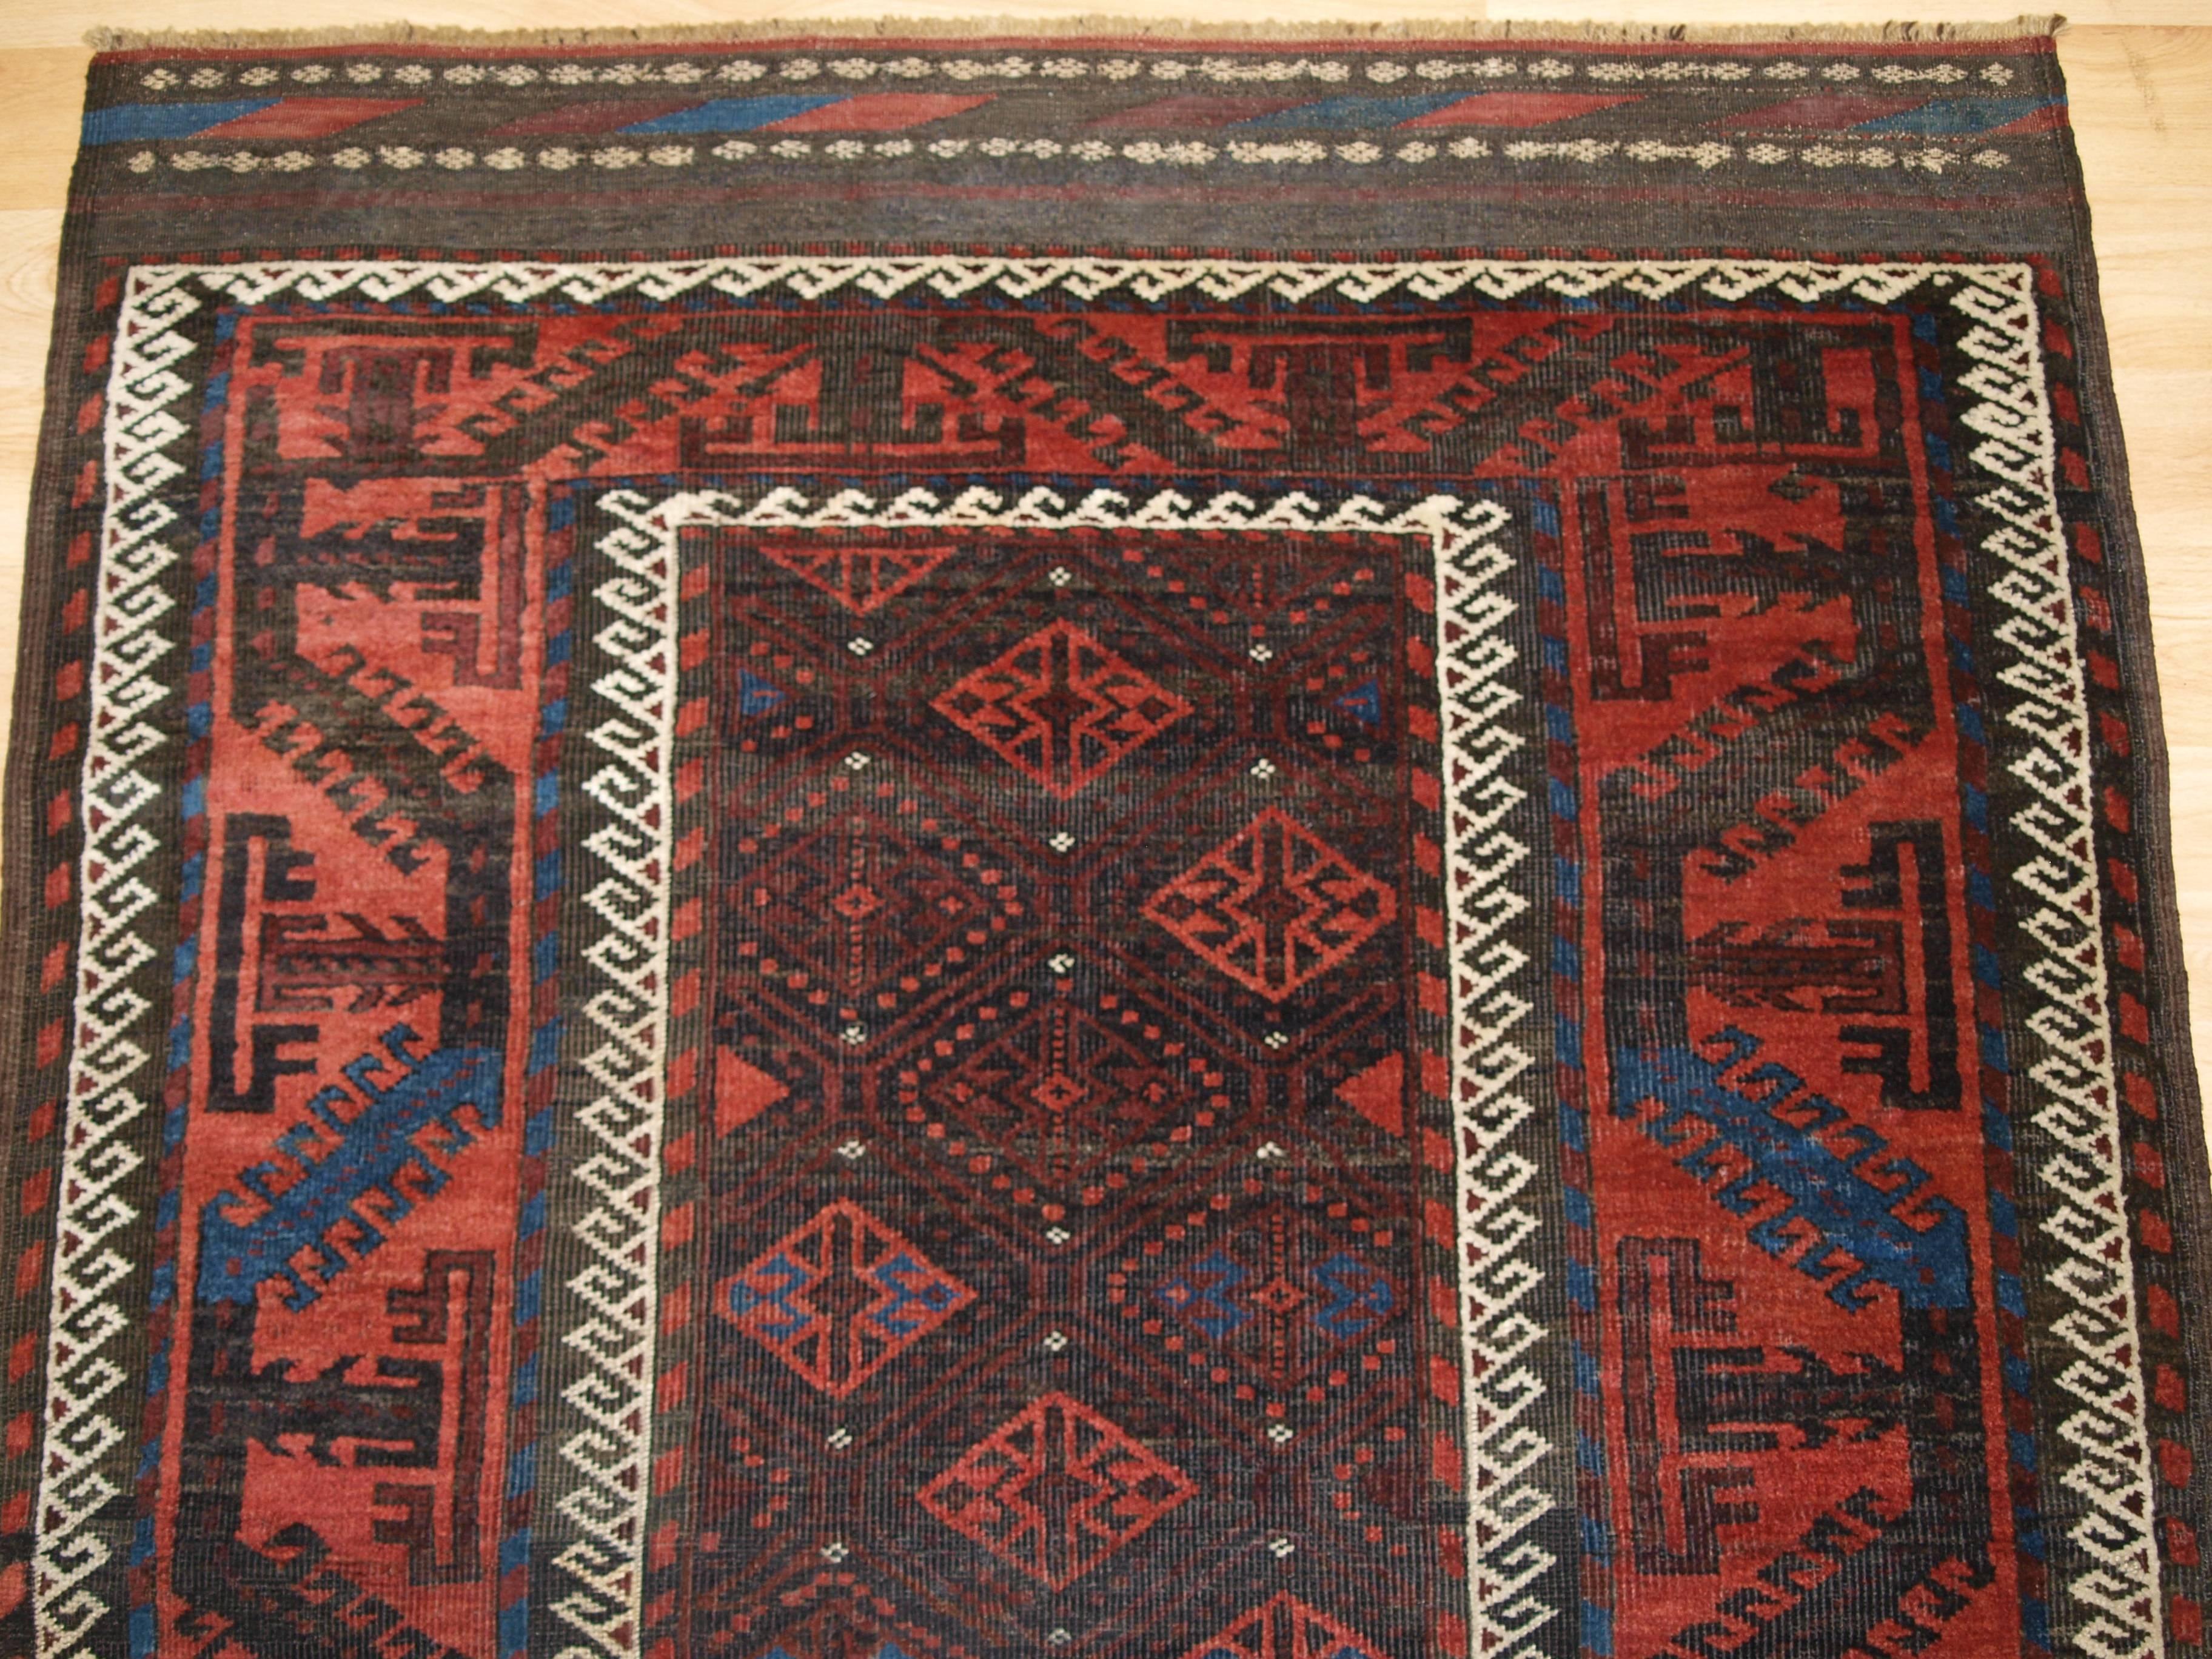 Superb Baluch Rug with a Diamond Lattice Design, circa 1870 In Excellent Condition For Sale In Moreton-in-Marsh, GB